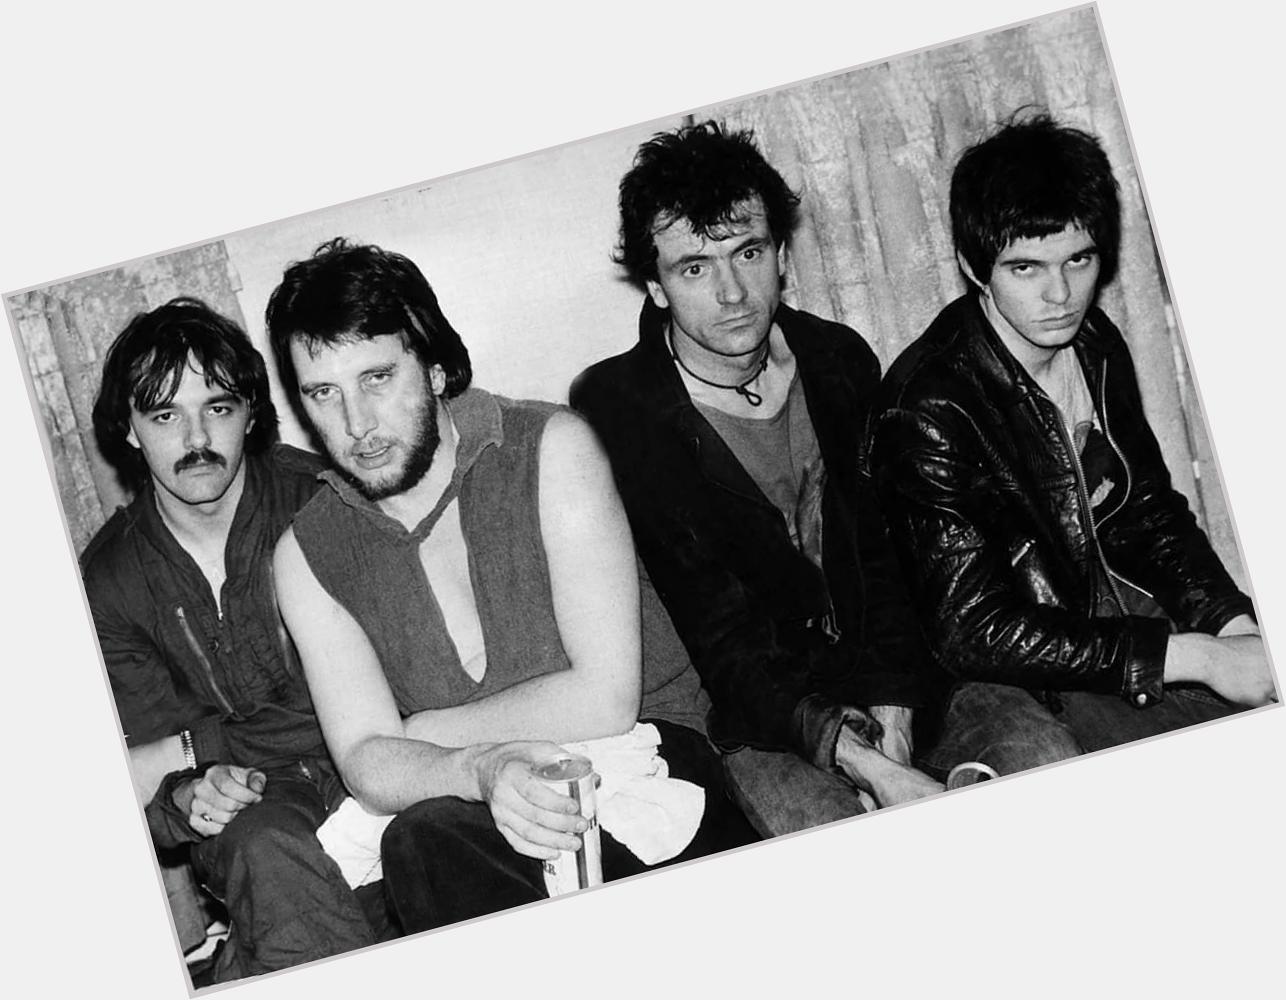  Happy birthday Dave Greenfield of The Stranglers 